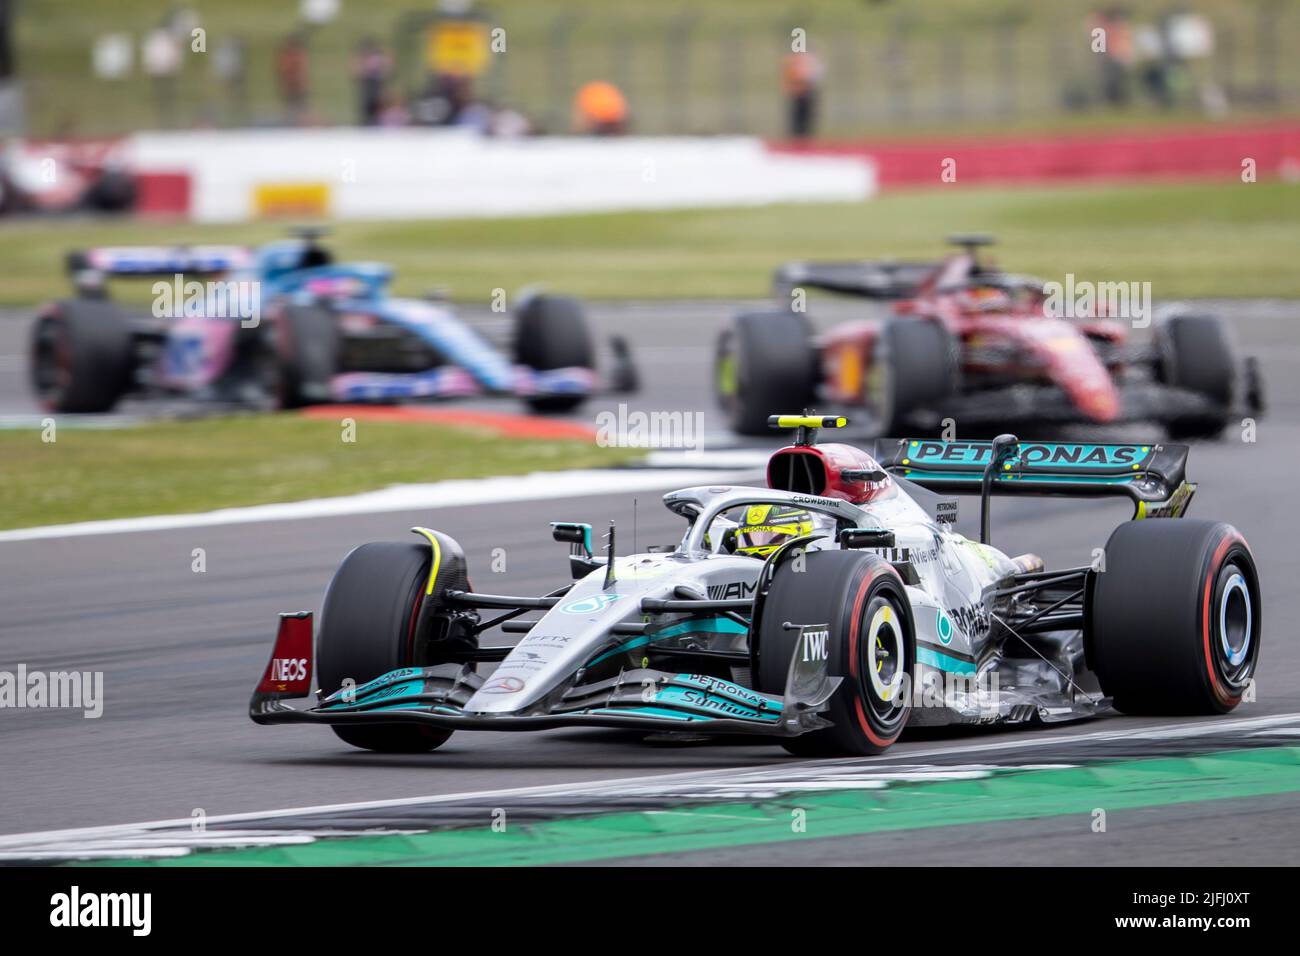 Silverstone, UK. 3rd July 2022, Silverstone Circuit, Silverstone, Northamptonshire, England: British F1 Grand Prix, Race day: Mercedes-AMG Petronas F1 Team driver Lewis Hamilton in his Mercedes F1 W13 leads the pack Credit: Action Plus Sports Images/Alamy Live News Stock Photo